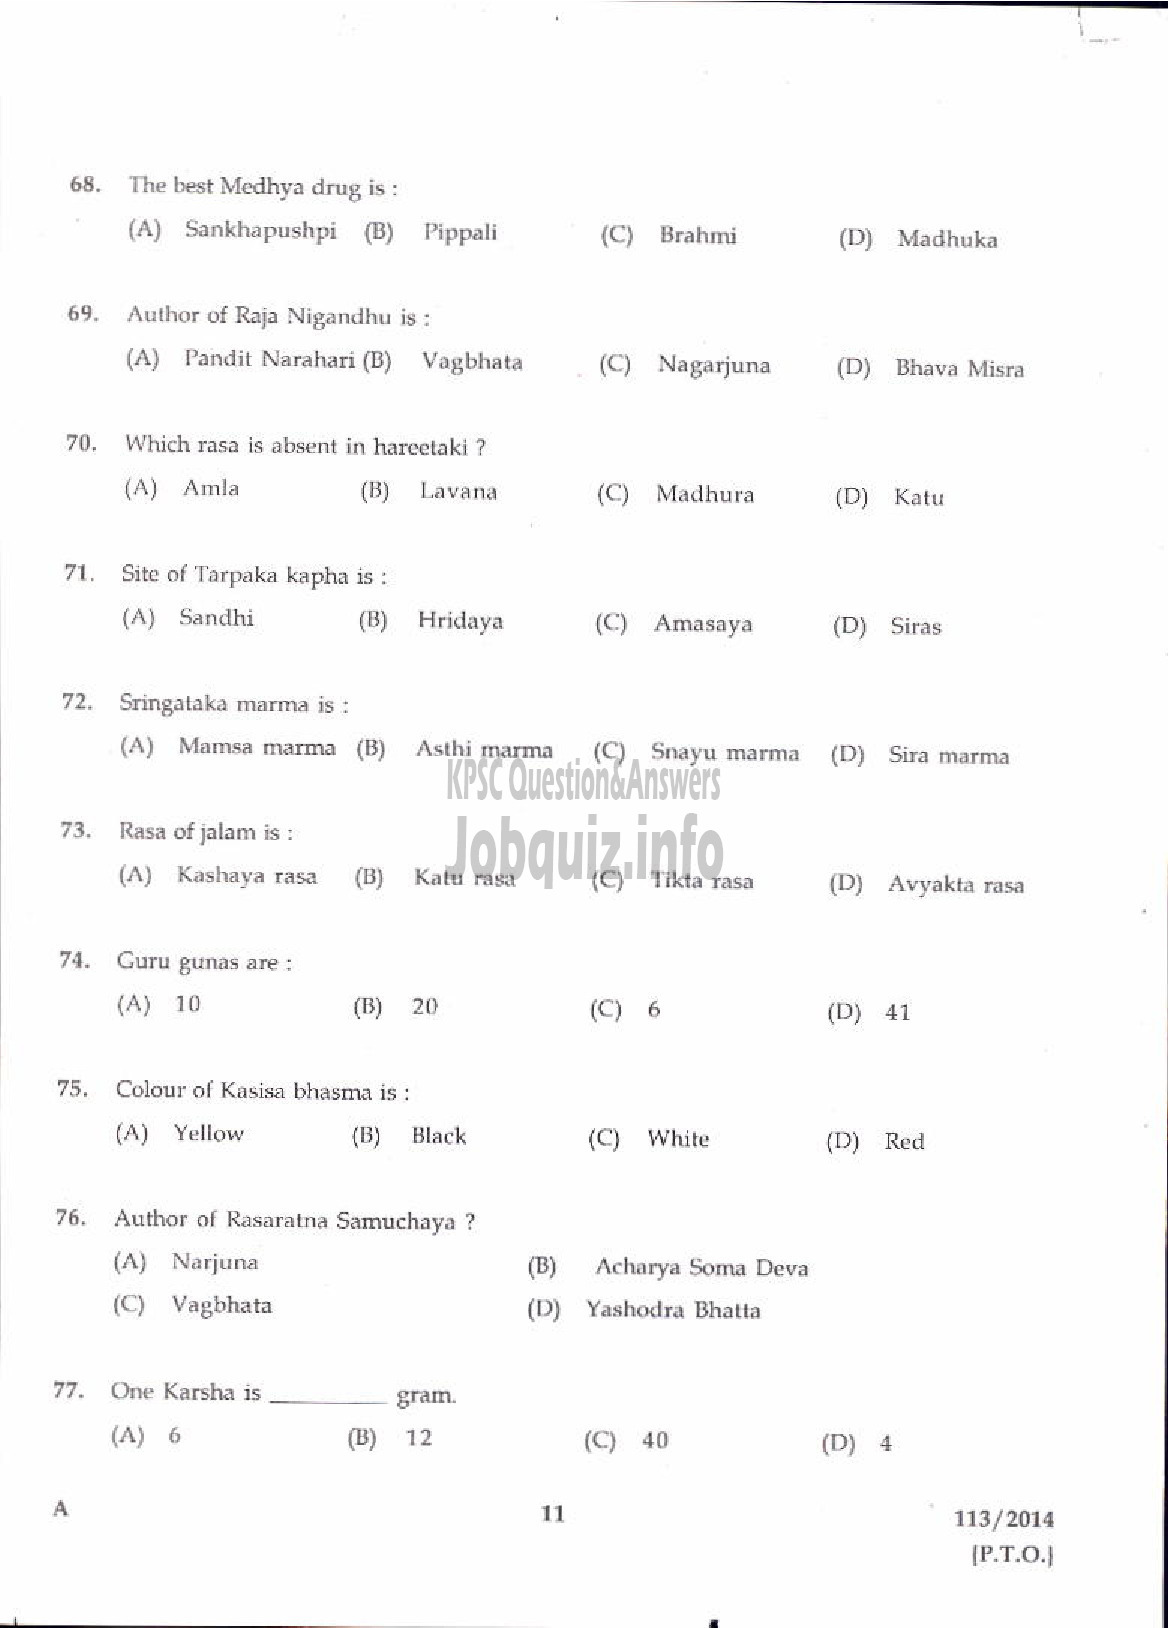 Kerala PSC Question Paper - DRUGS INSPECTOR AYURVEDA DRUGS CONTROL-9